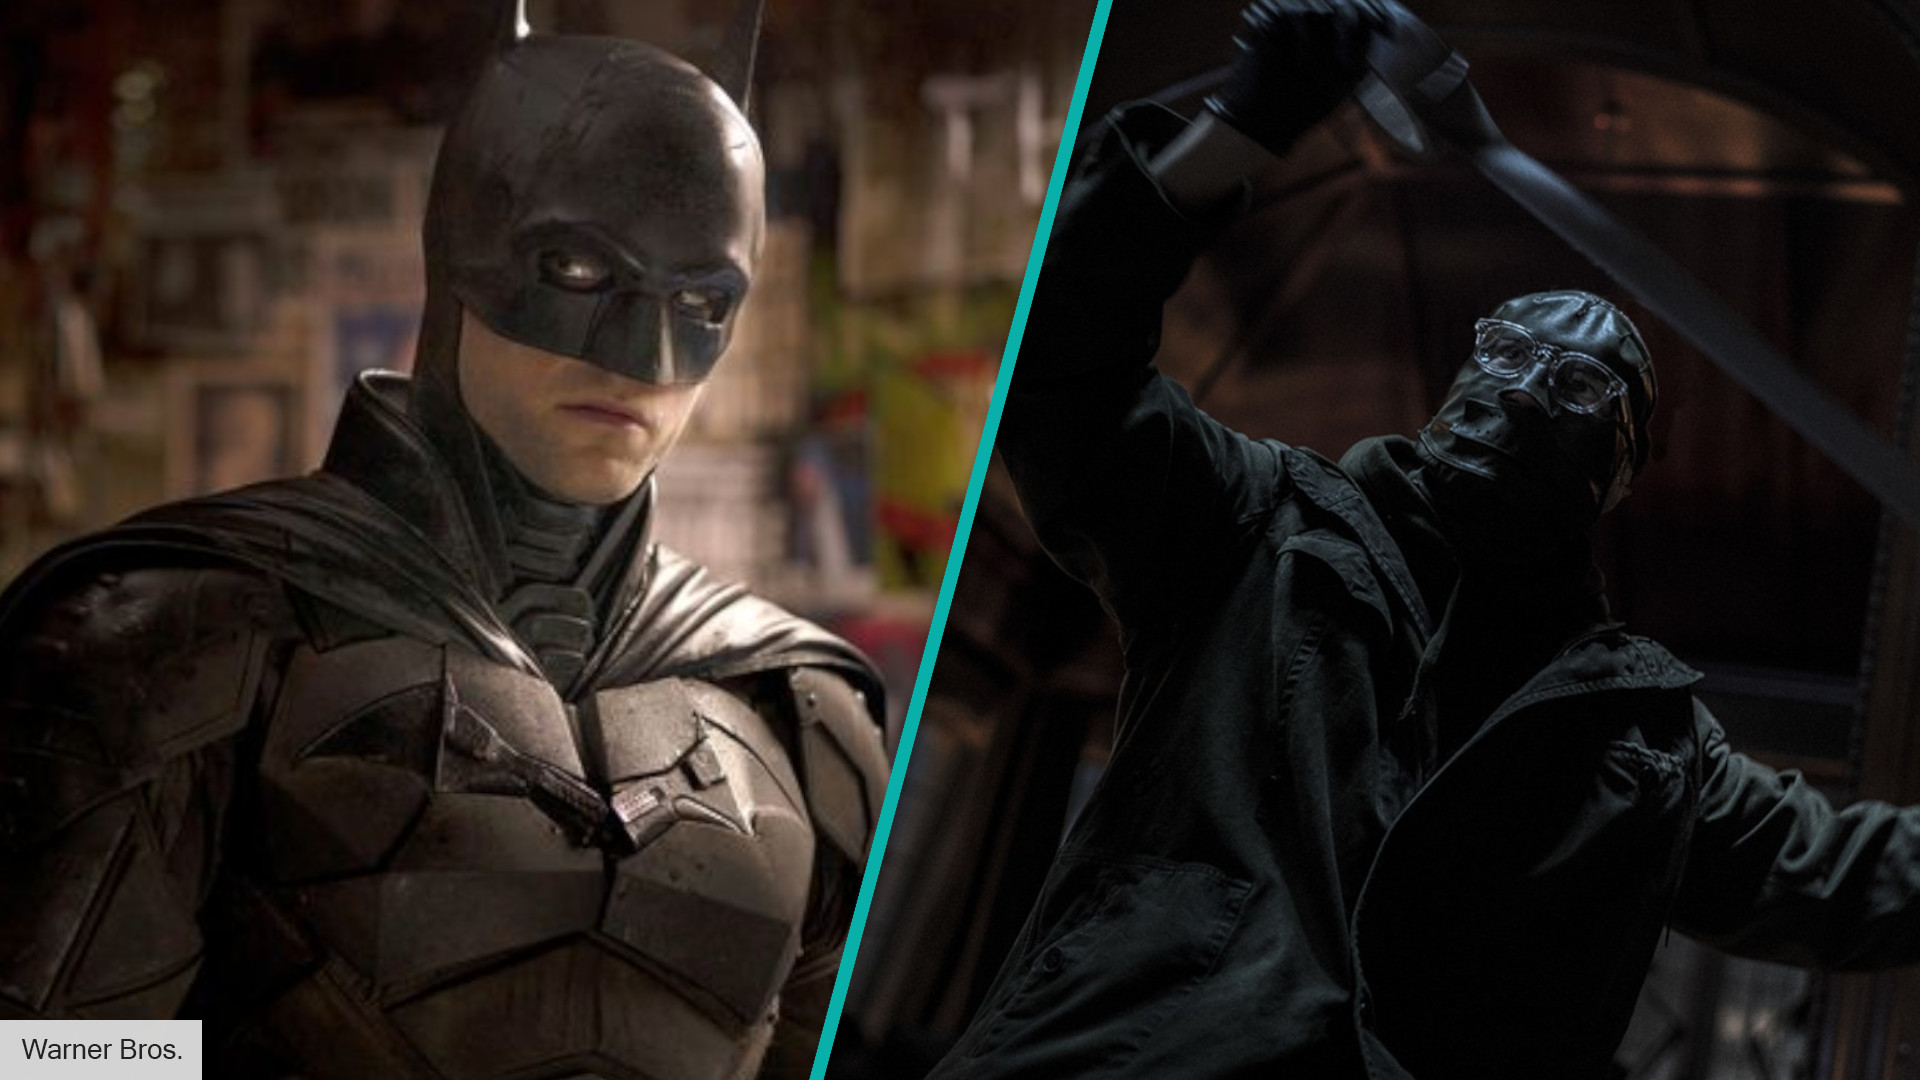 Matt Reeves wanted to explore what made someone a villain with The Riddler  | The Digital Fix